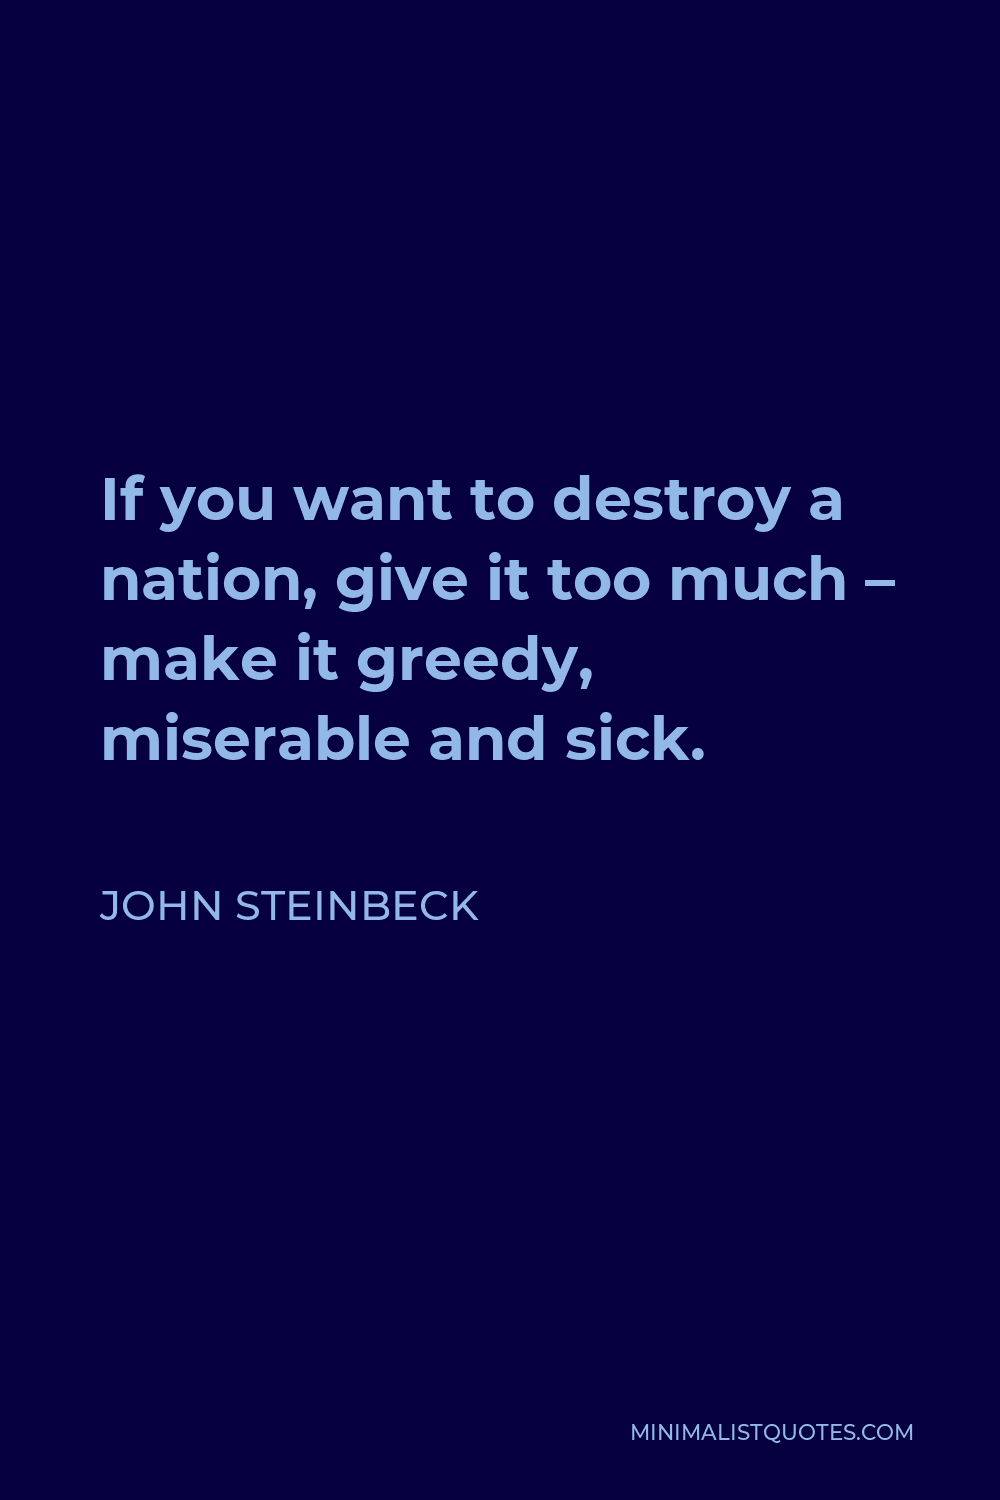 John Steinbeck Quote - If you want to destroy a nation, give it too much – make it greedy, miserable and sick.